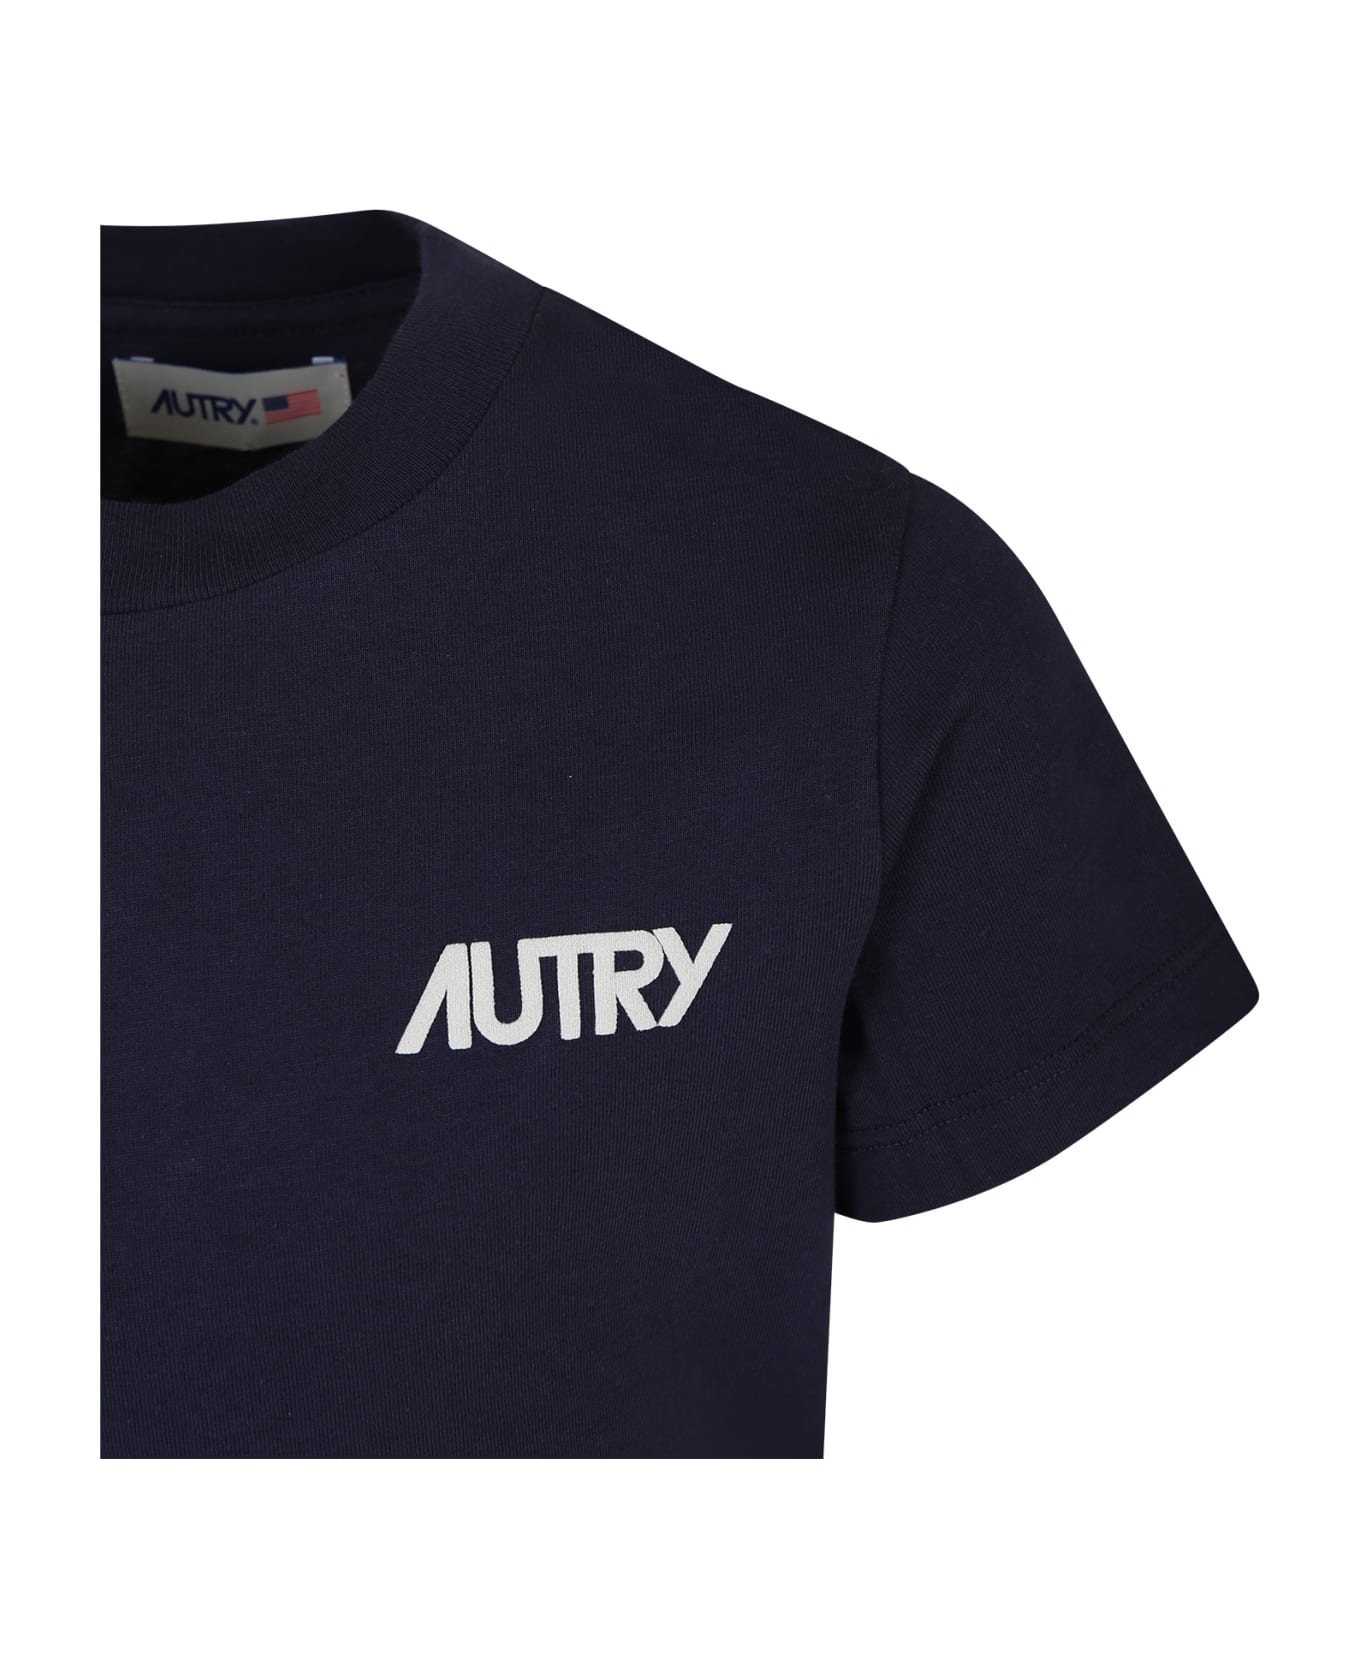 Autry Blue T-shirt For Kids With Logo - Blue